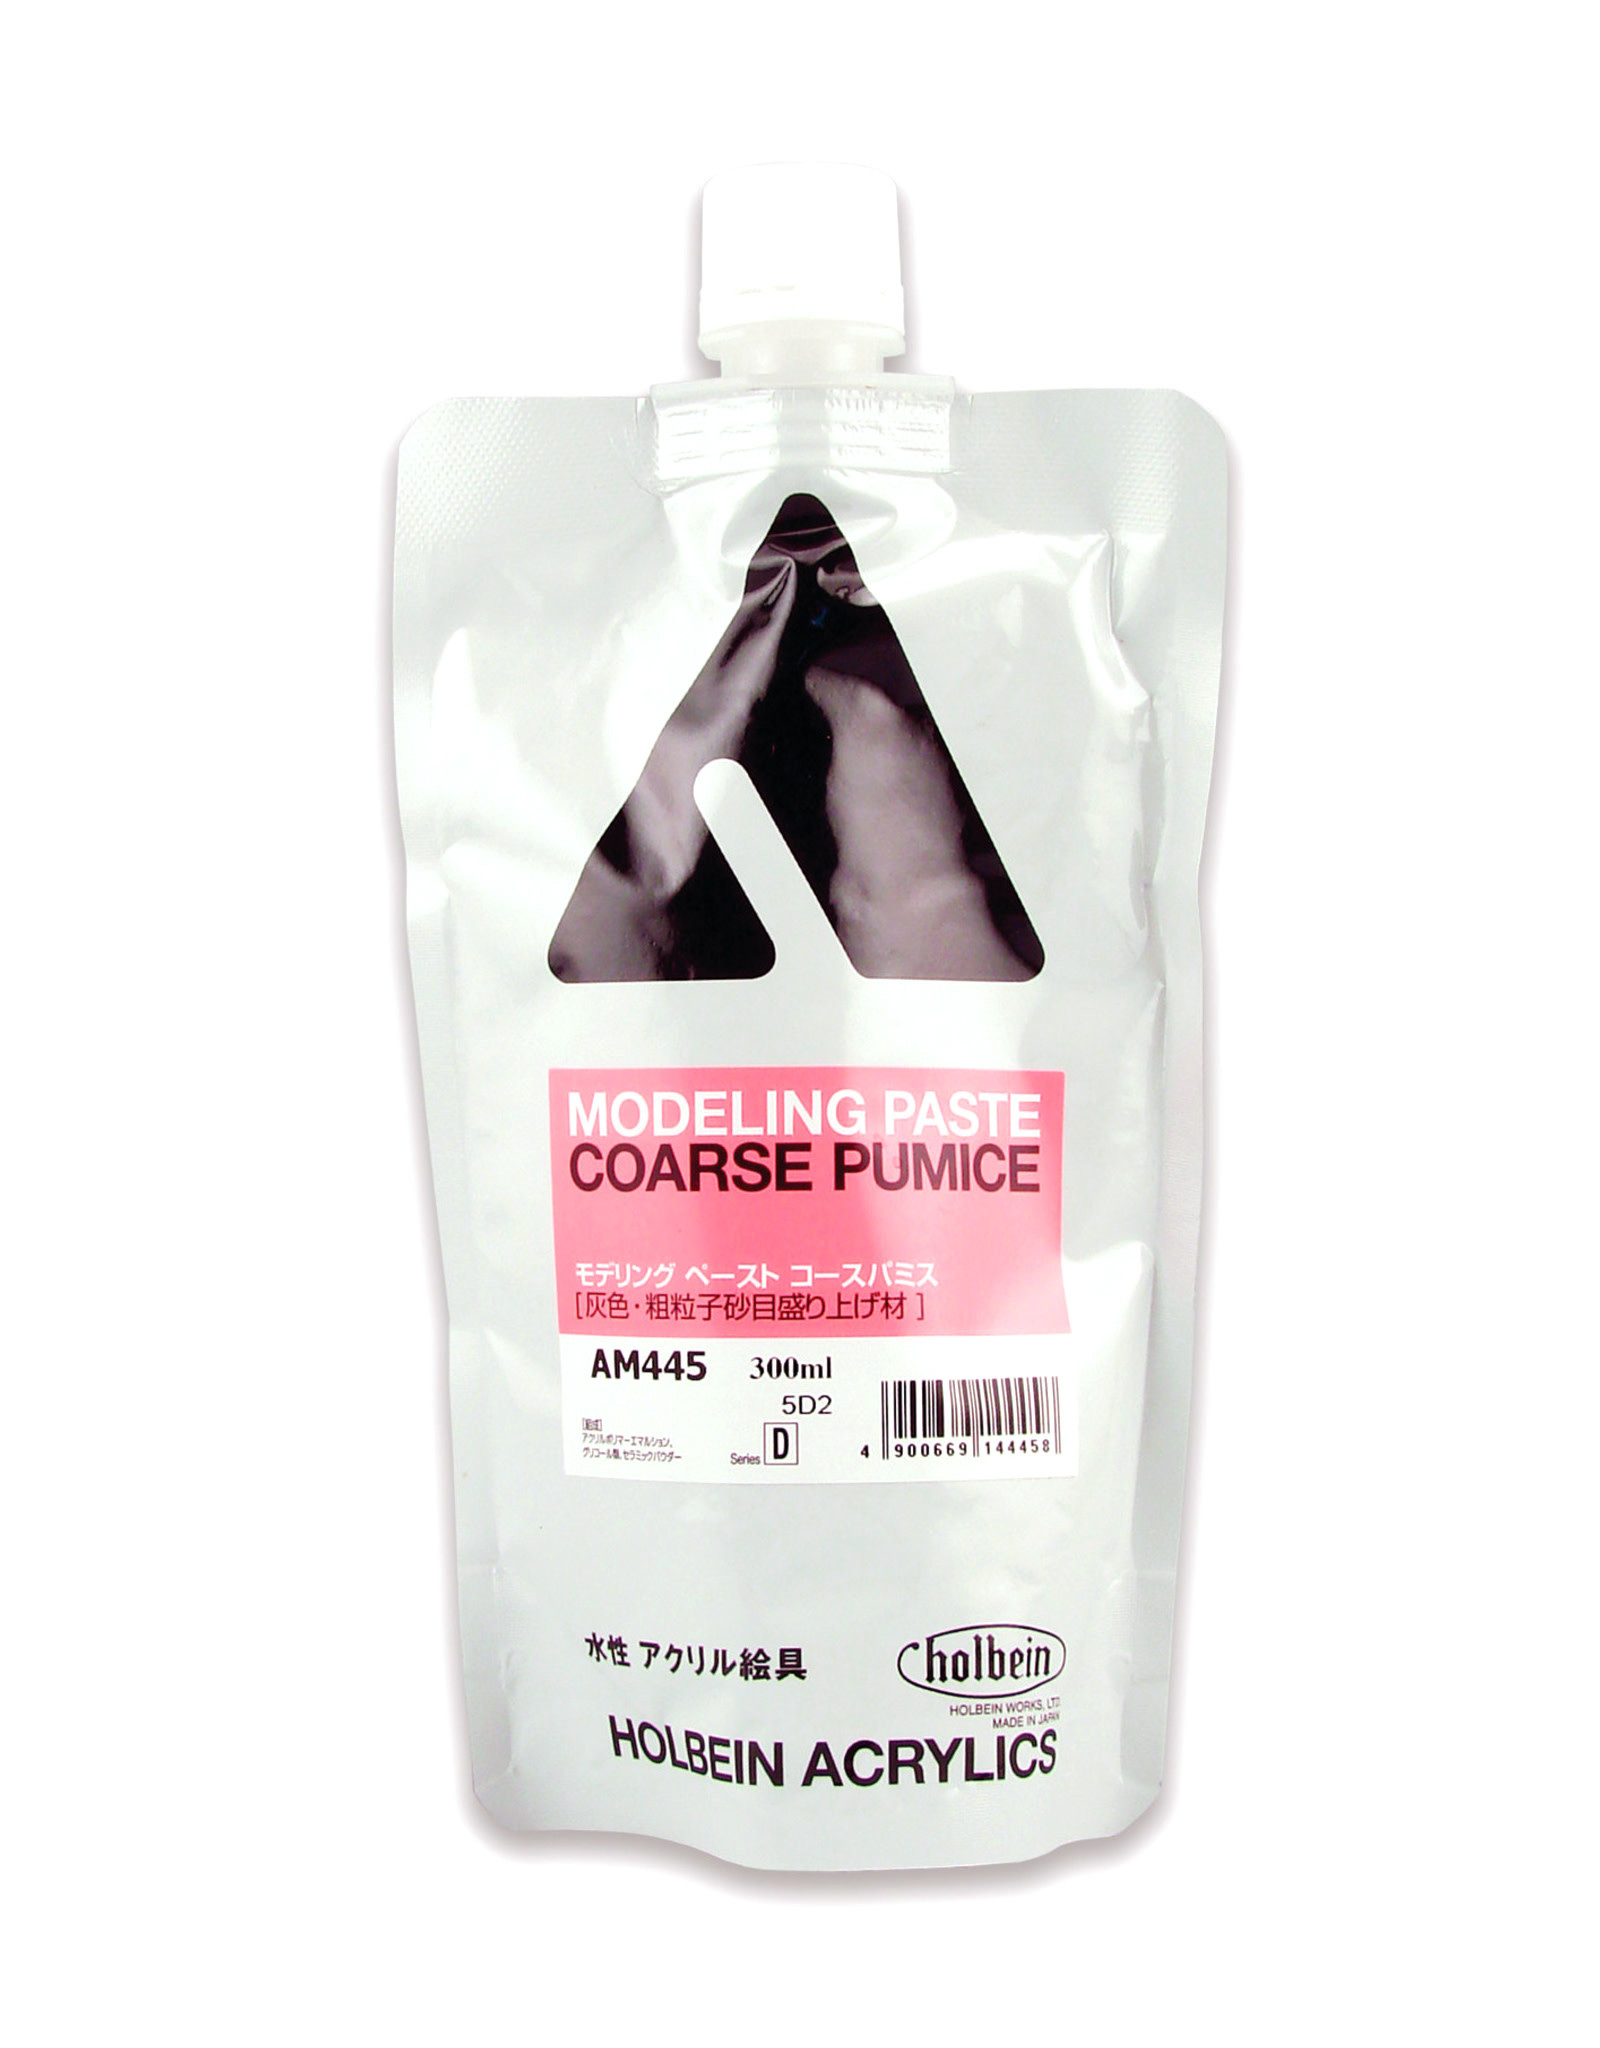 HOLBEIN Holbein Acrylic Modeling Paste, Course Pumice 300ml